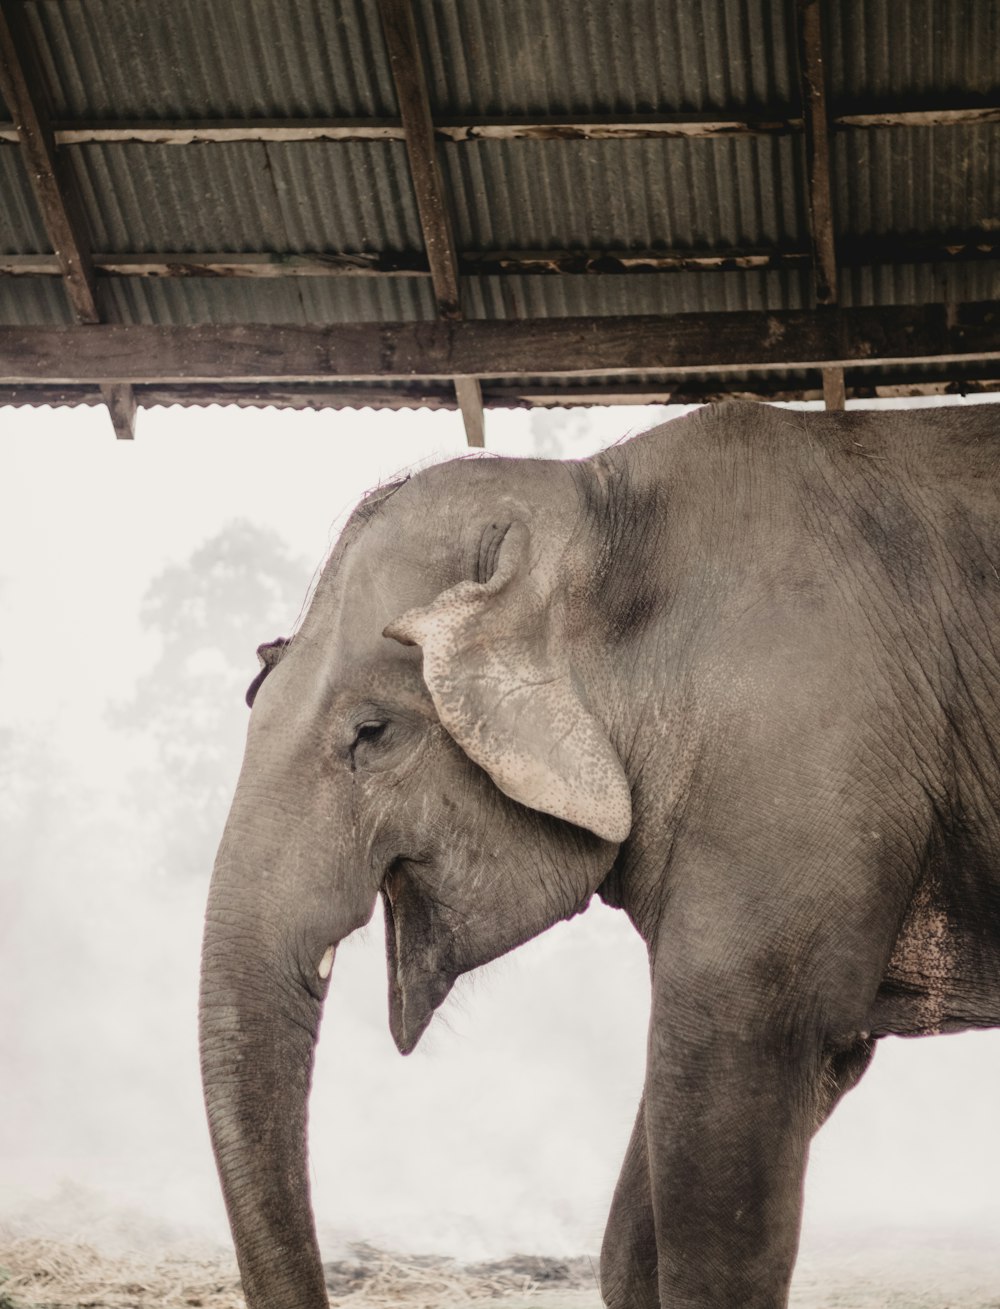 a large elephant standing under a wooden structure